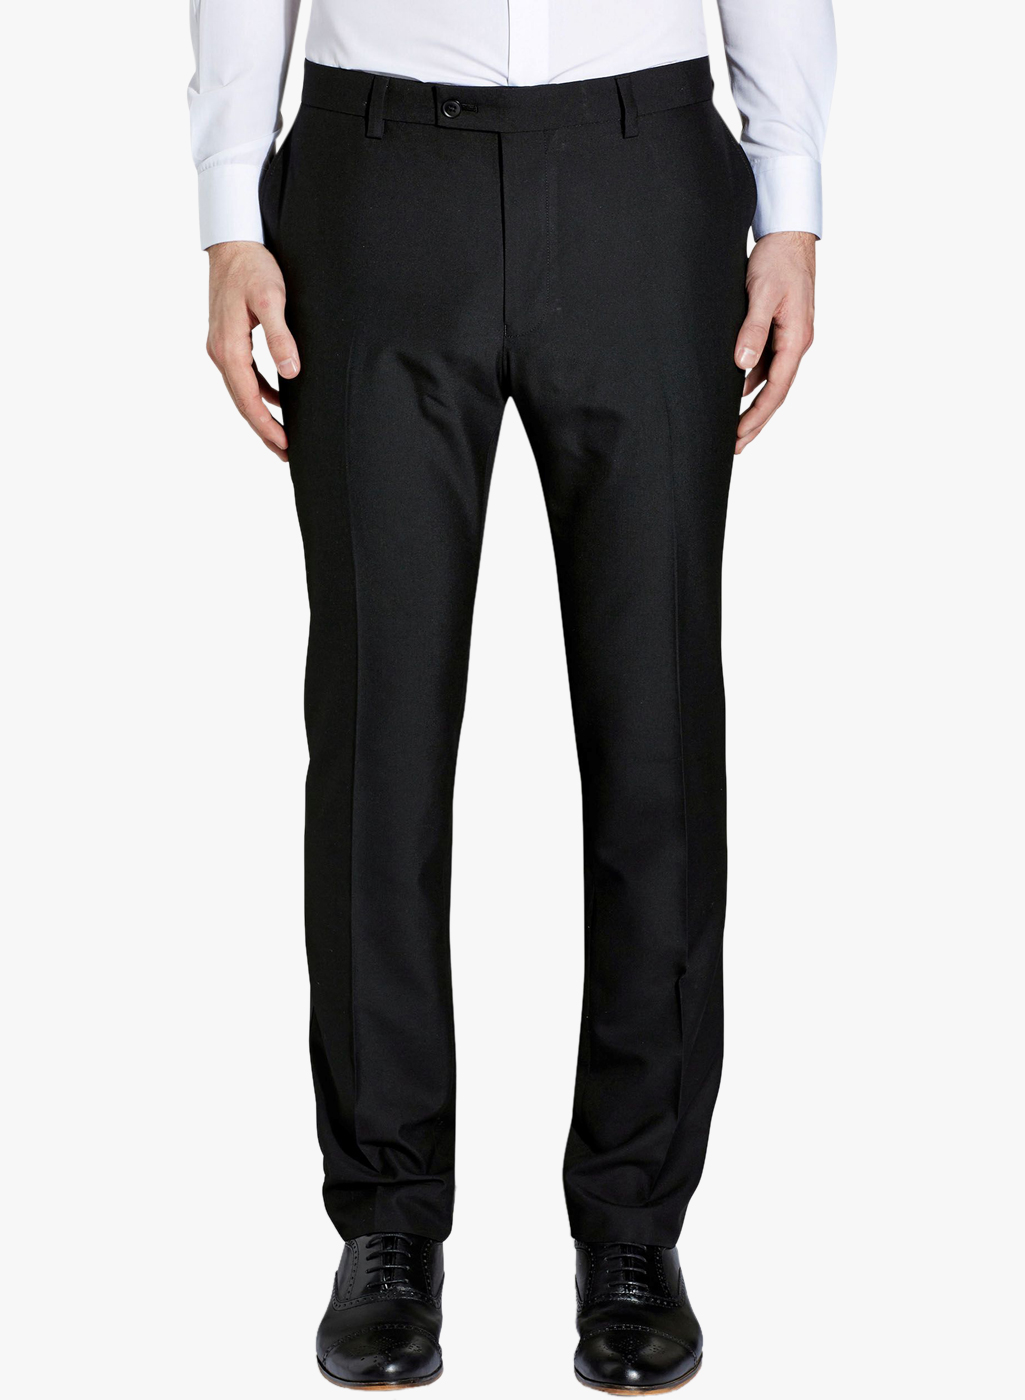 Slim Fit Navy Black Check Trousers | Buy Online at Moss